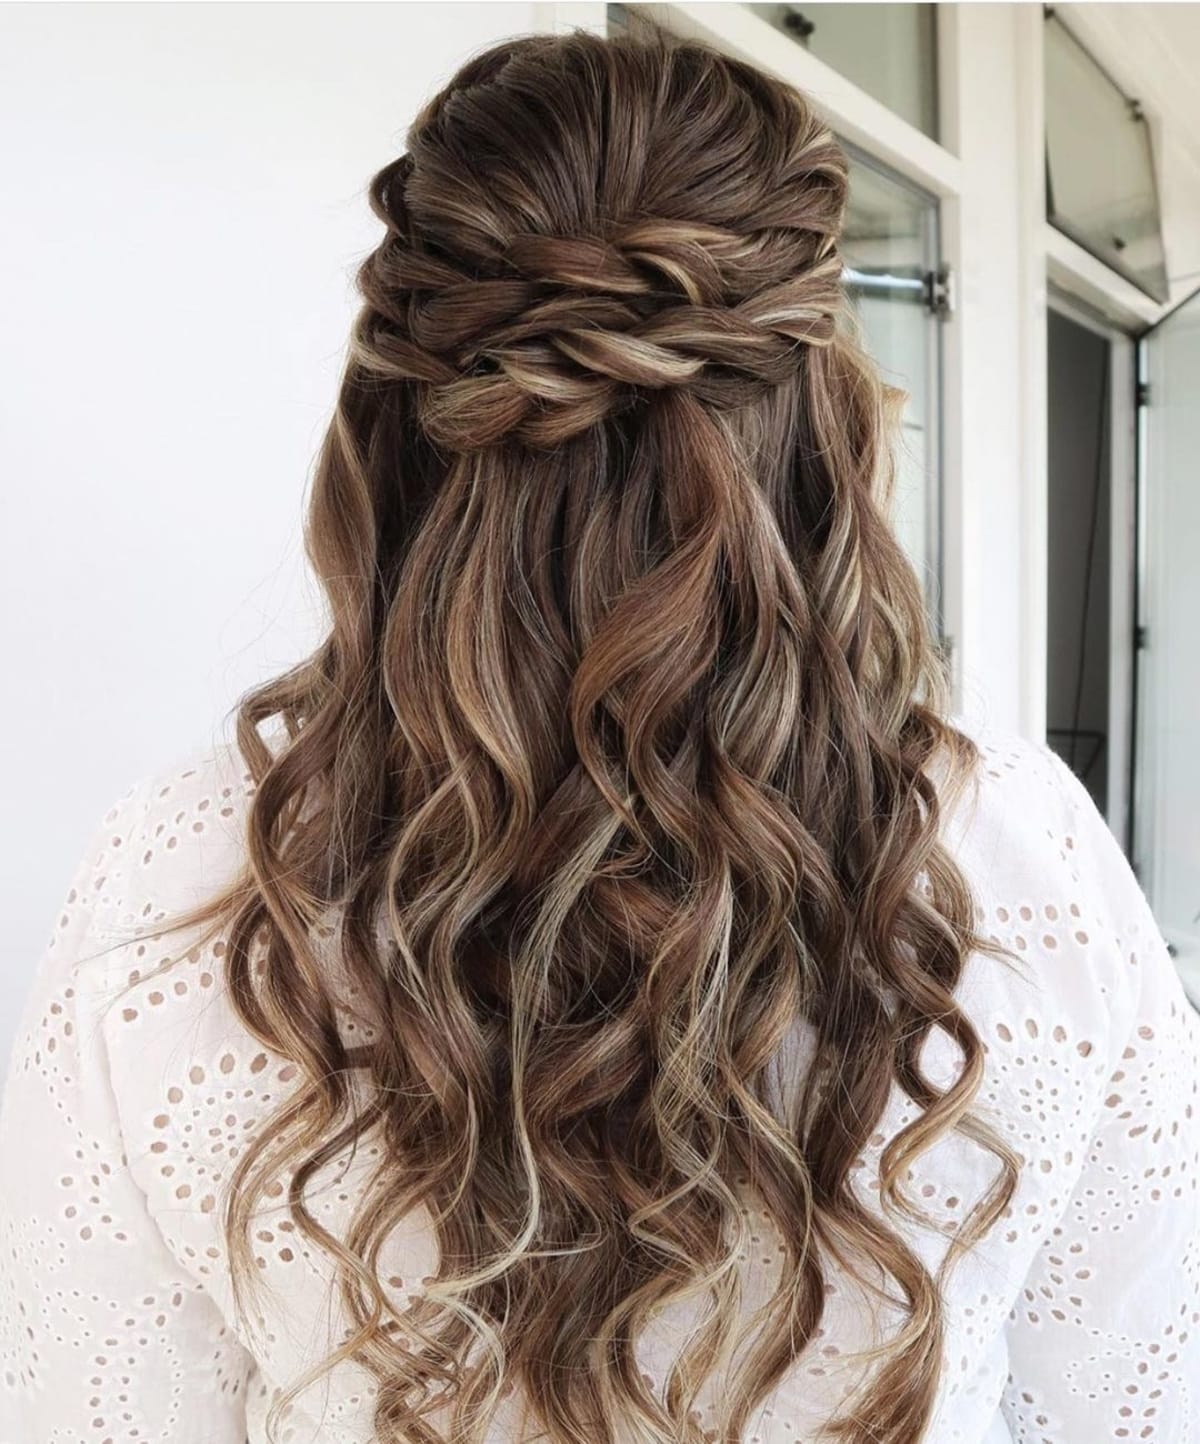 Casual twisted braid hairstyle